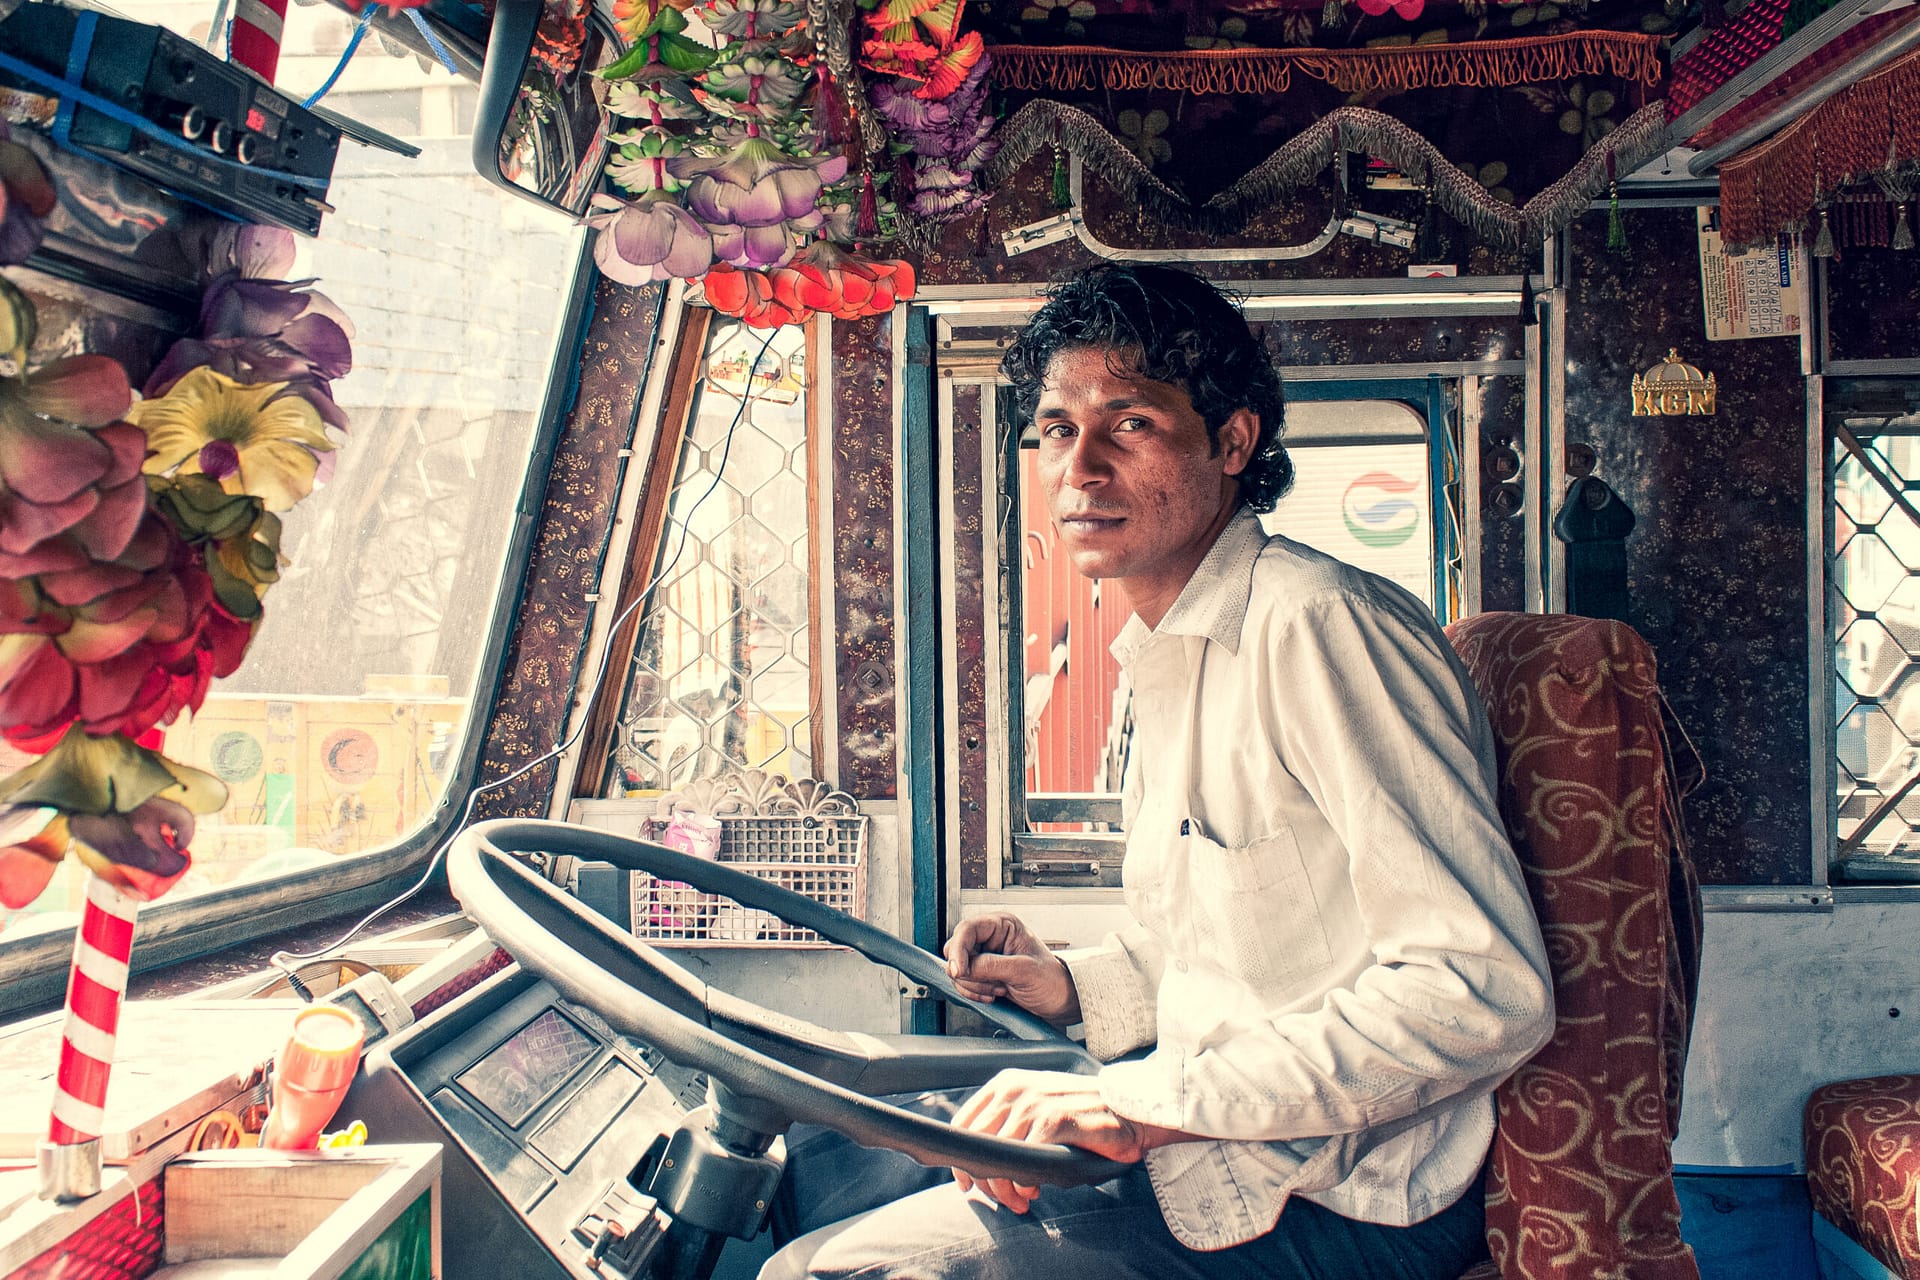 Image: Truck driver sitting in the cab